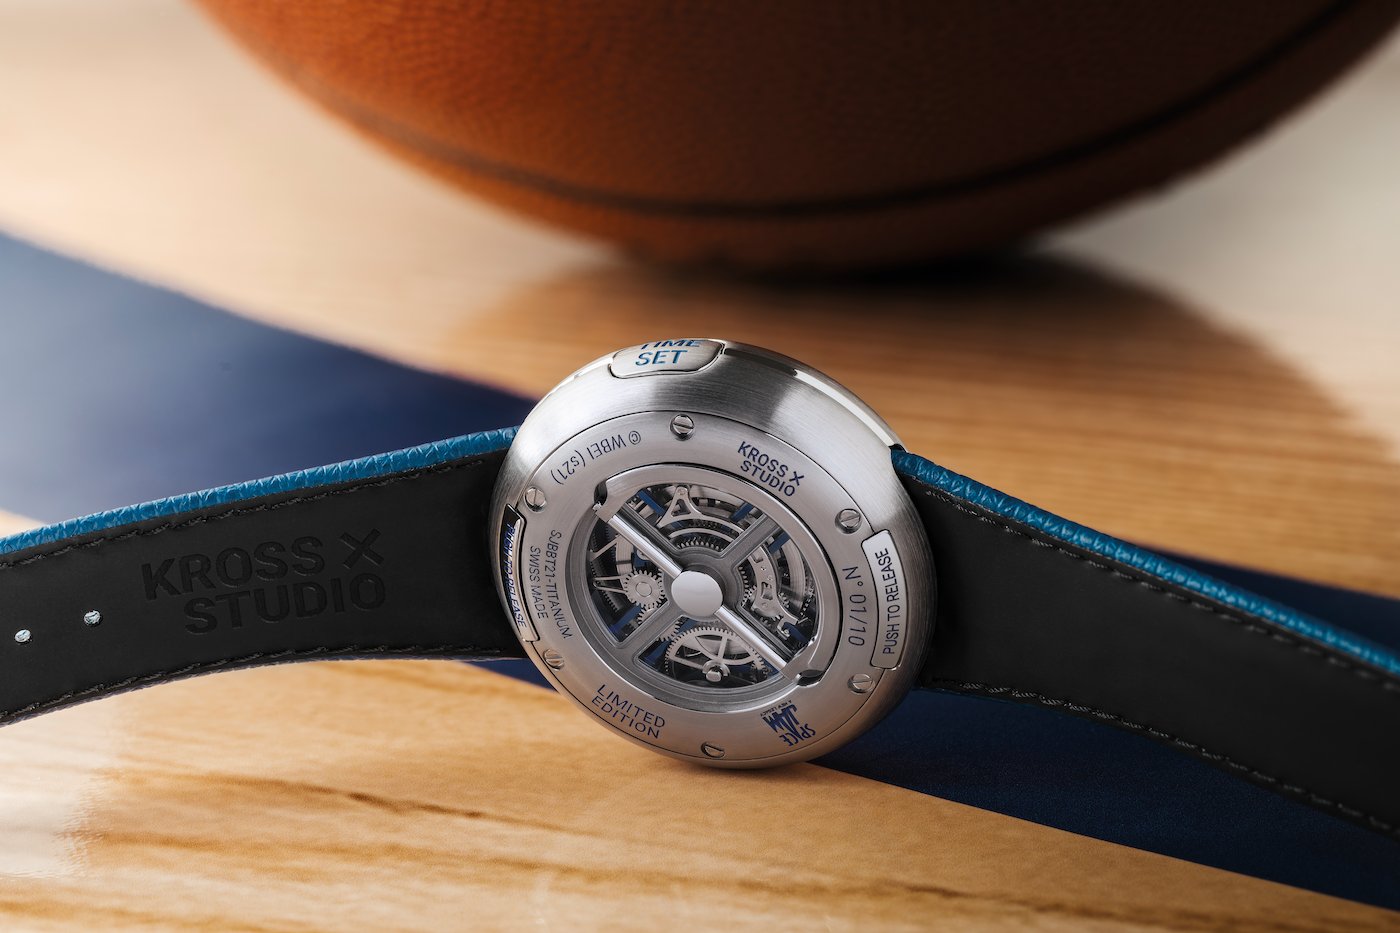 Introducing the “Space Jam: A New Legacy” watch collector set